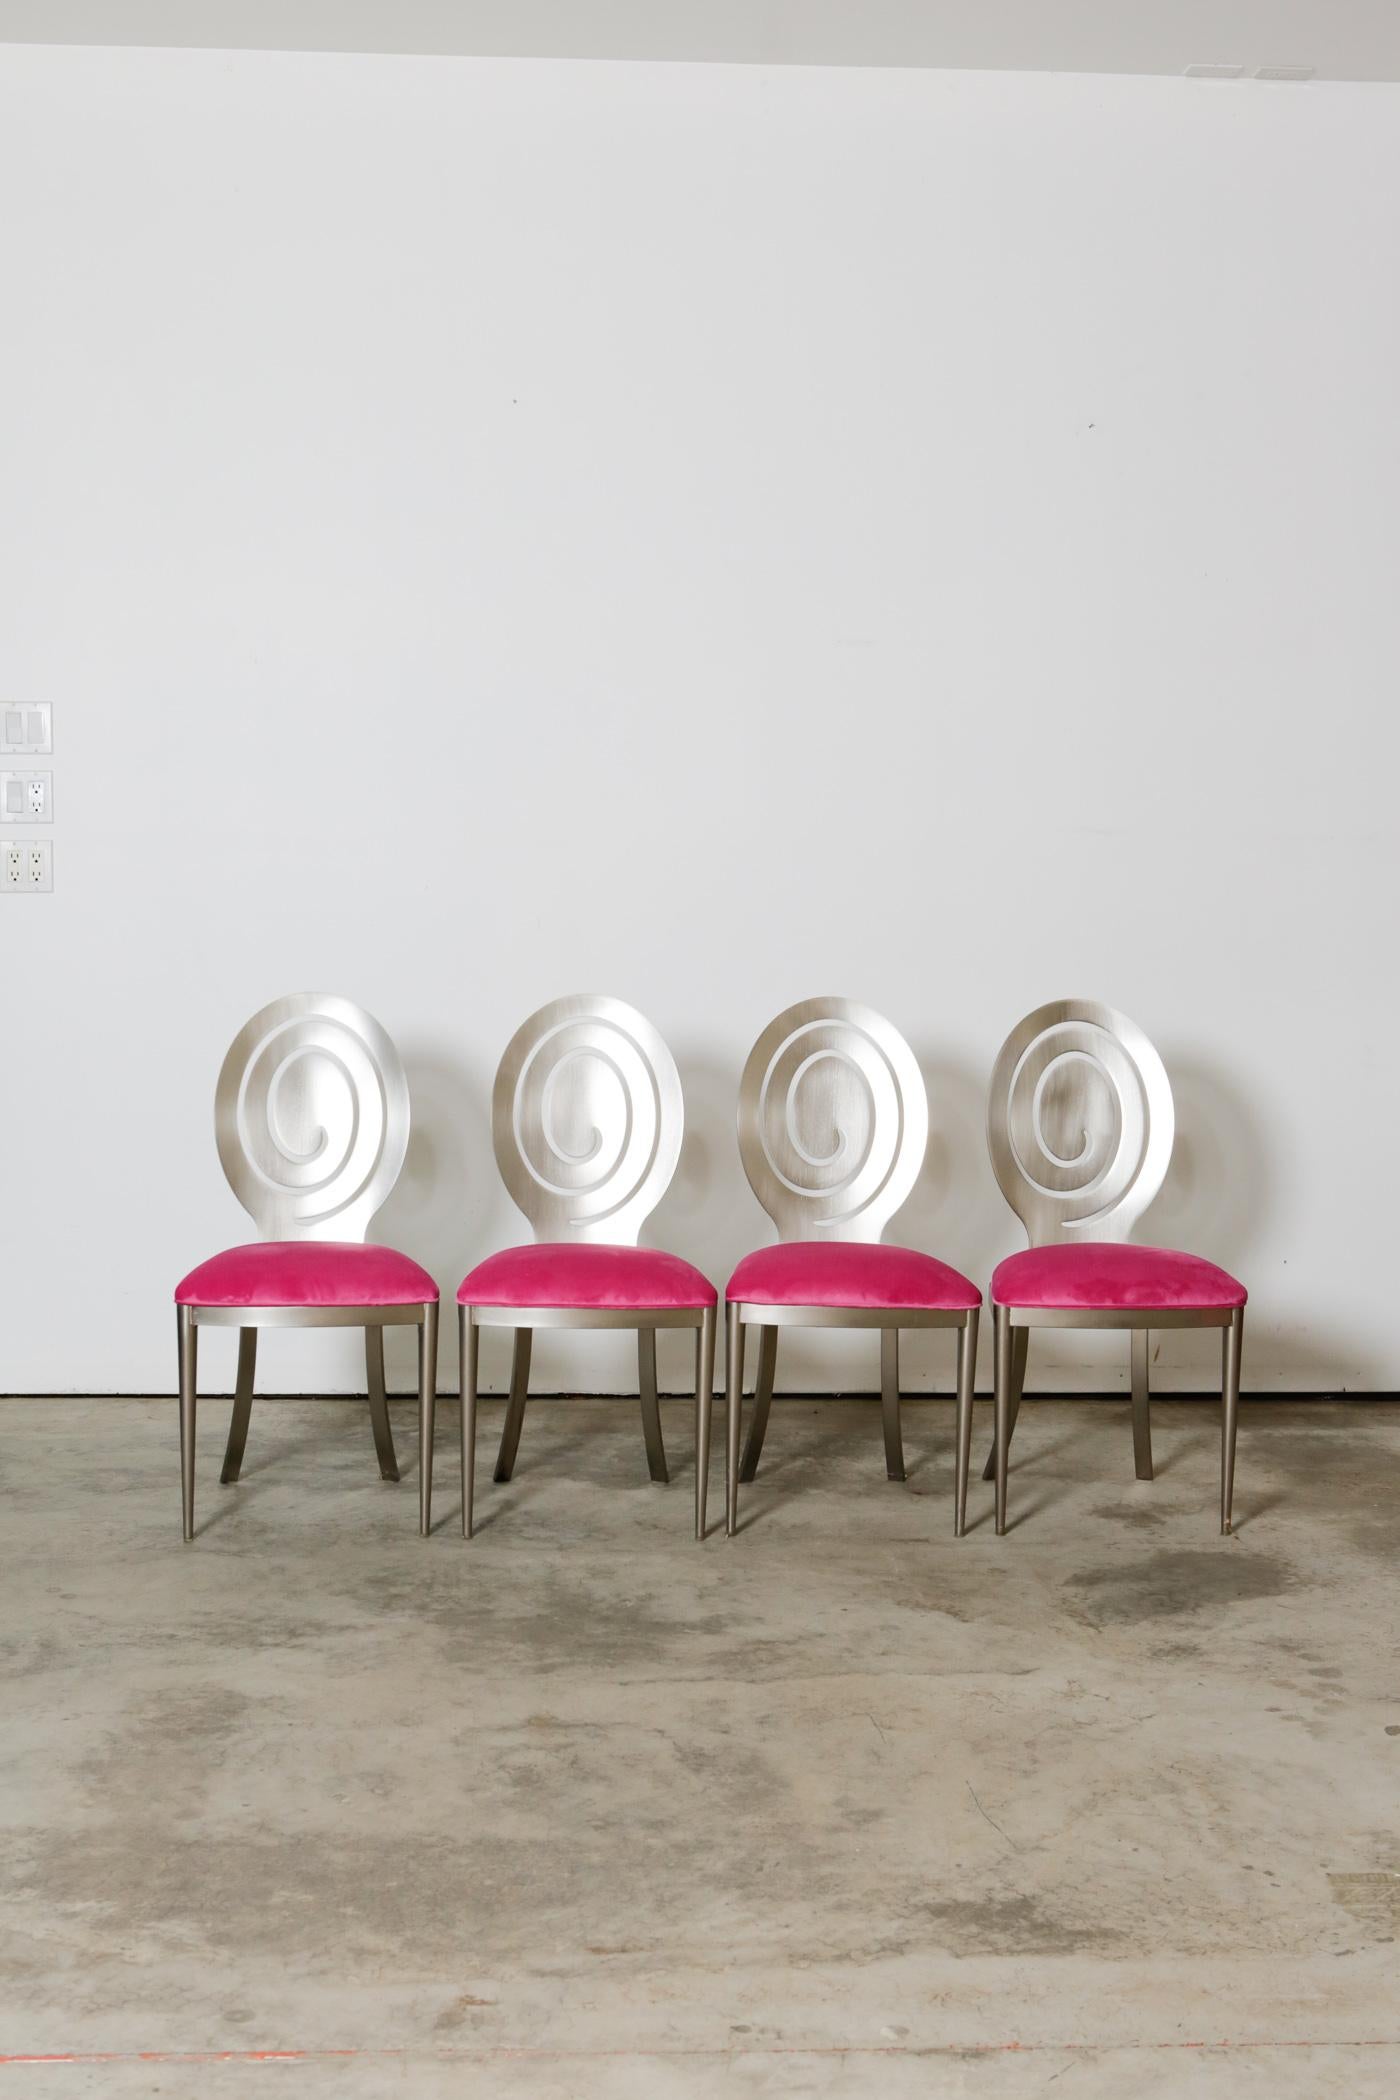 1980s swirling dining chairs in pink velvet new upholstery

These stainless steel chairs are the perfect balance of class and durability. With a new upholstery, the lush pink velvet fabric adds a unique addition that creates a pop of color. These